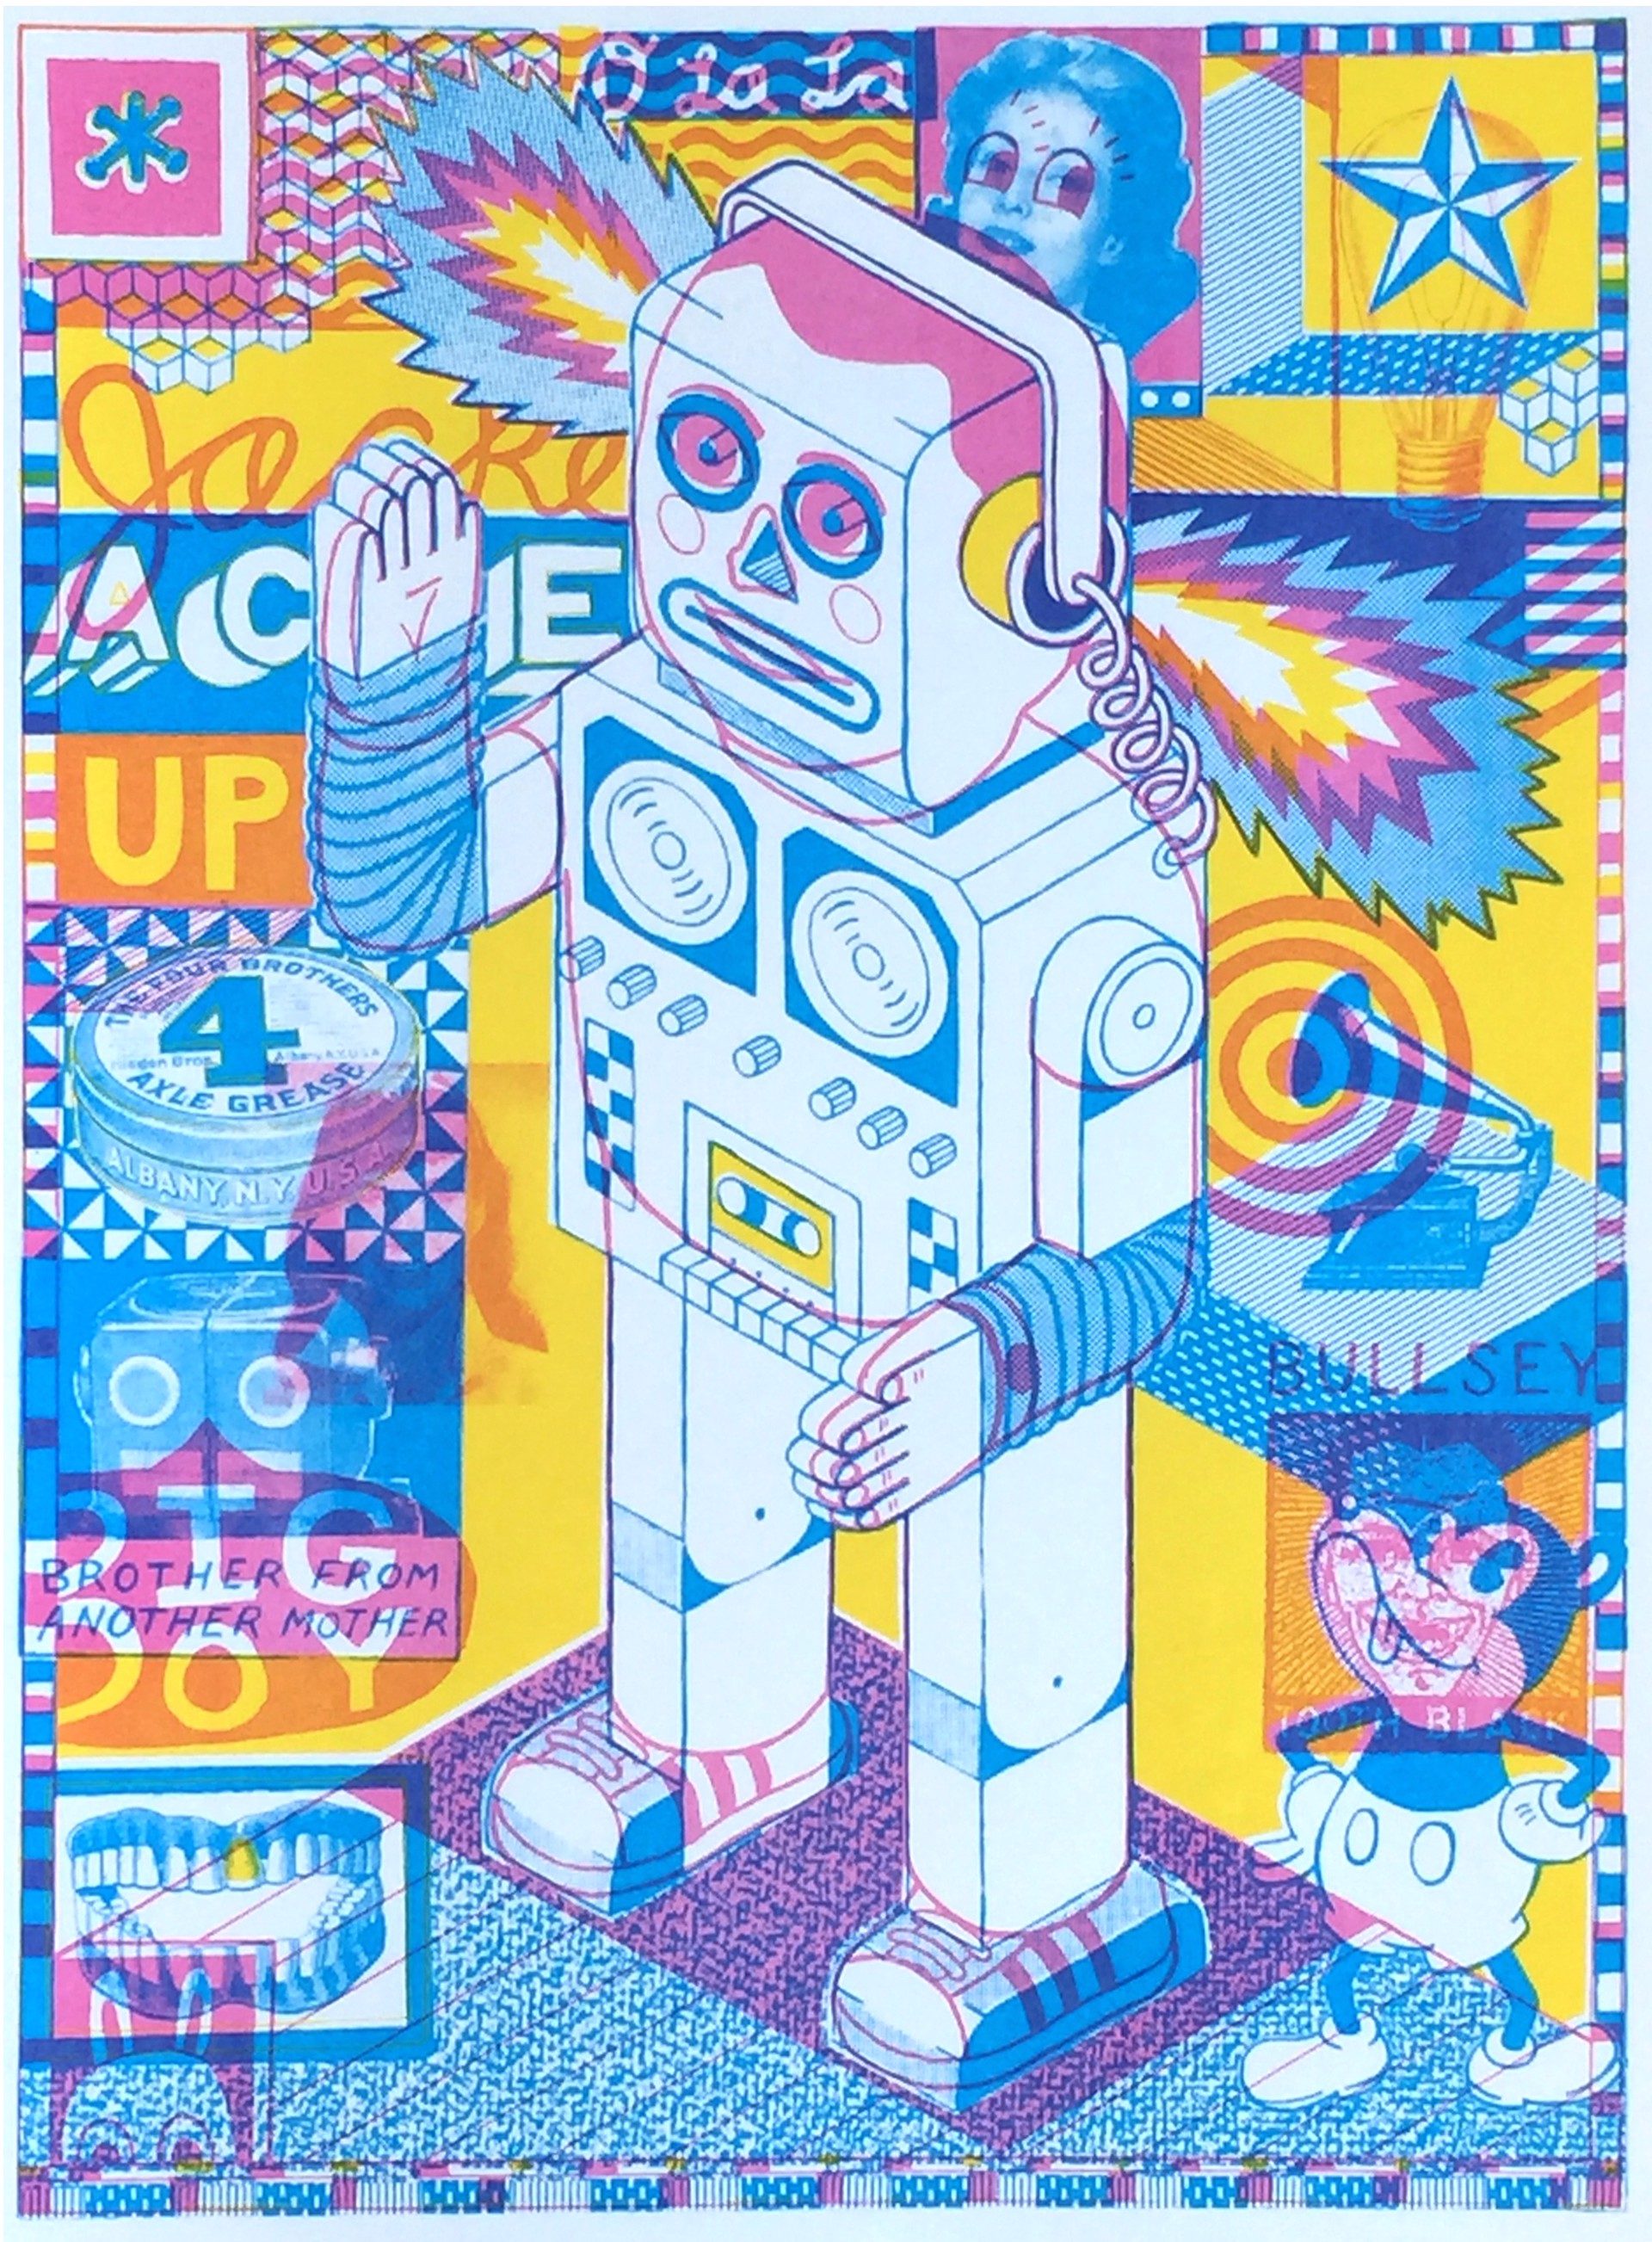 Robot Boy by Chadwick Tolley